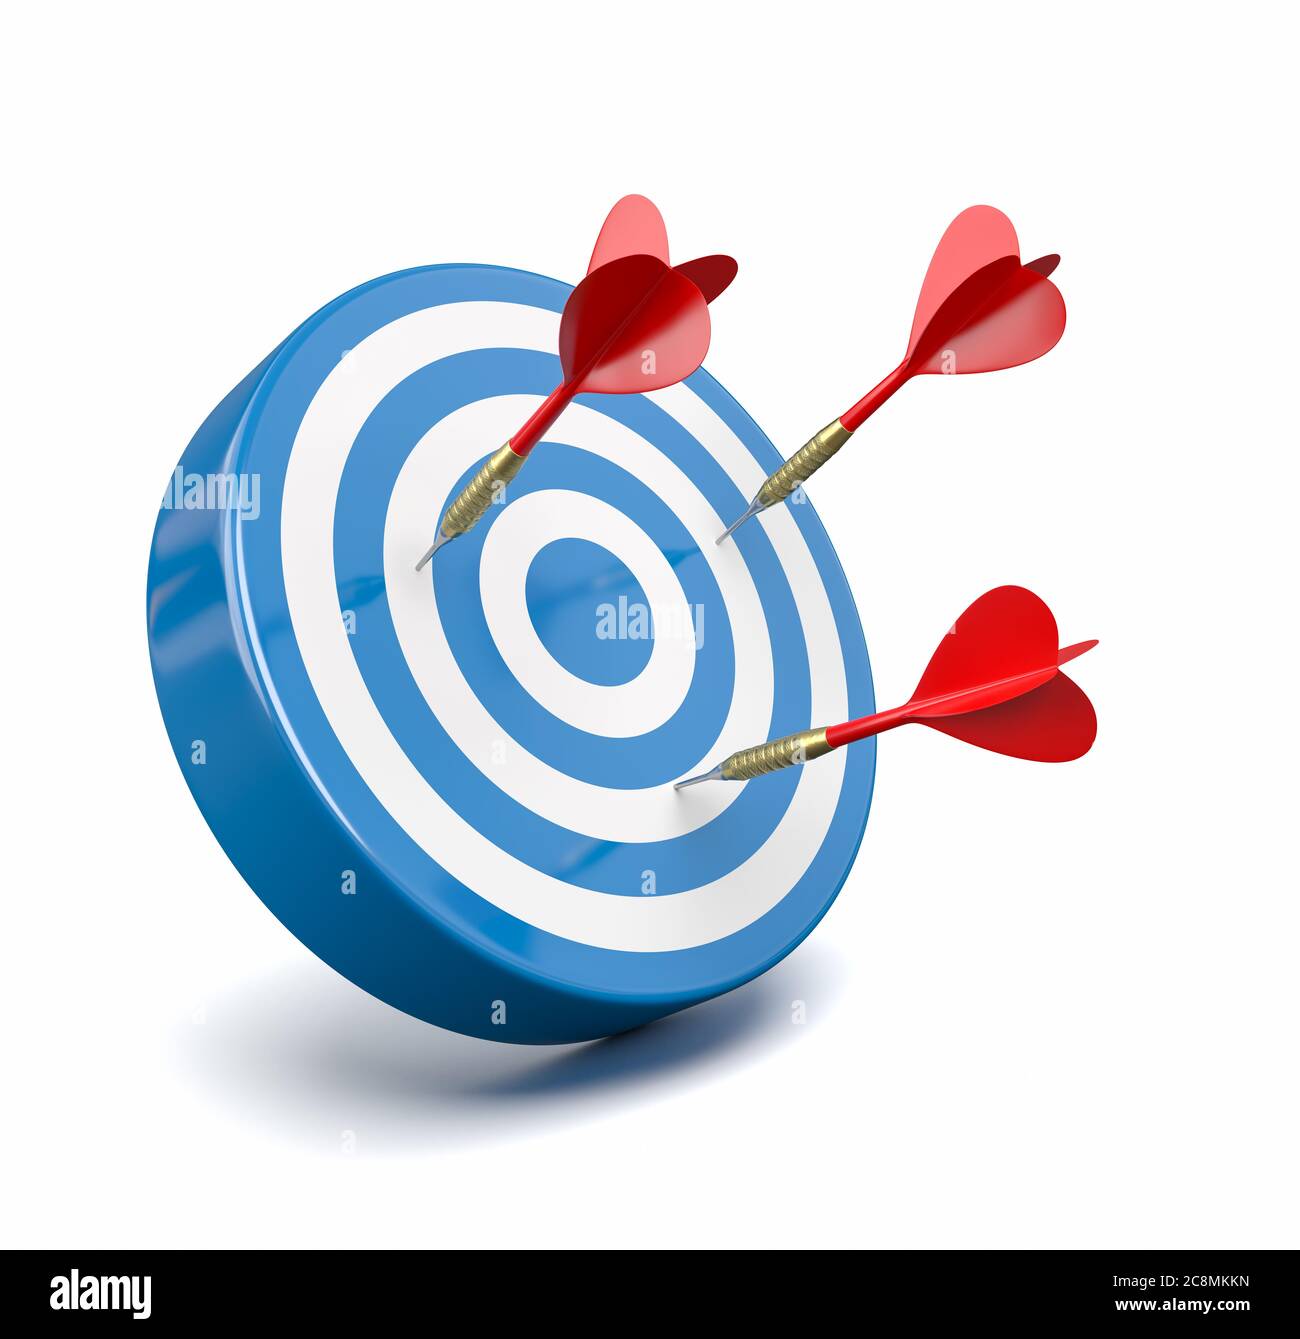 Red Darts Hitting a Blue Target, Failure Concept Stock Photo